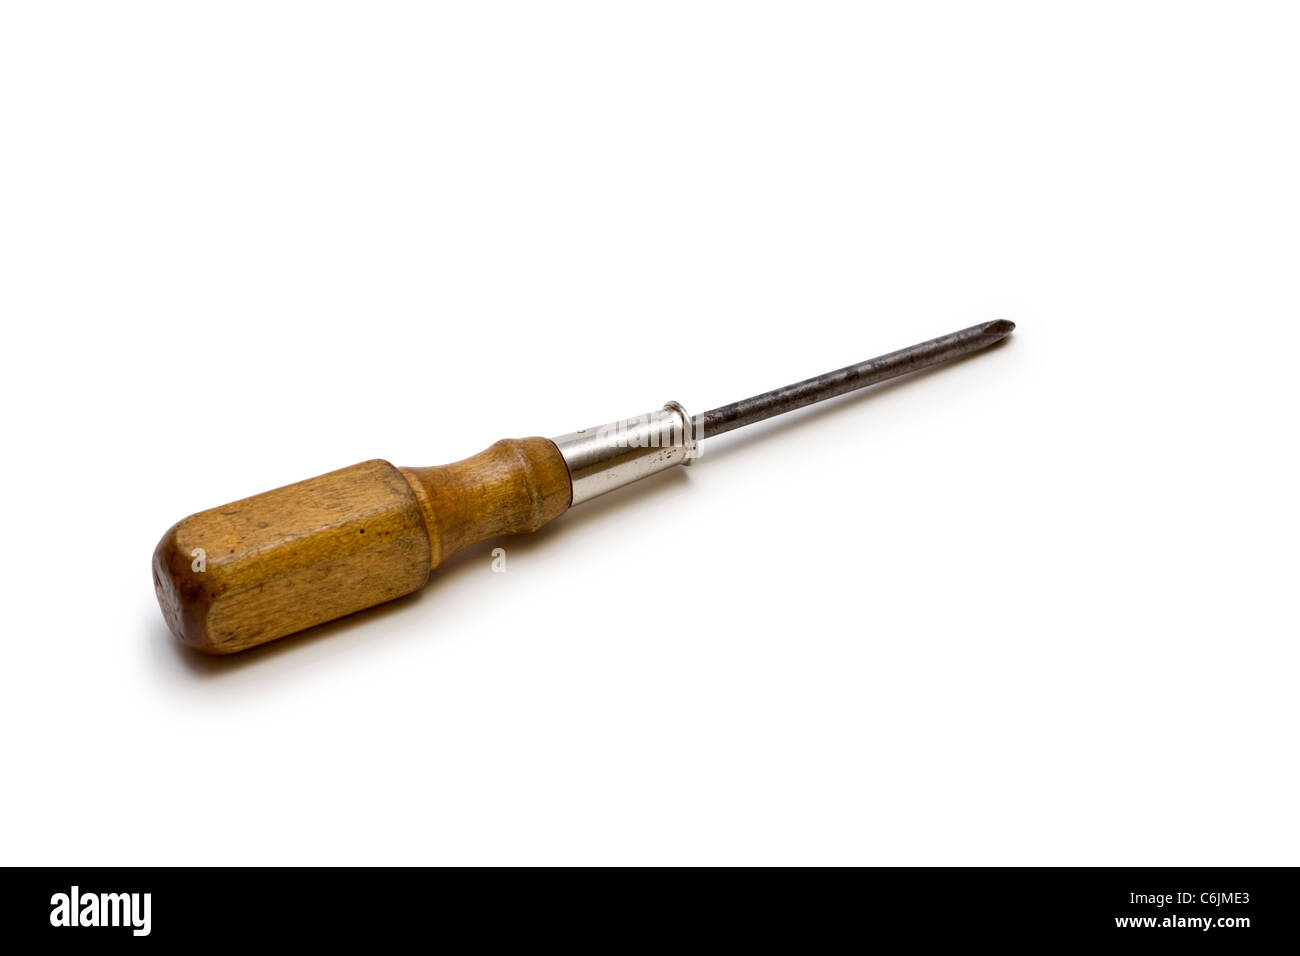 Phillips screwdriver with wooden handle on a white background Stock Photo